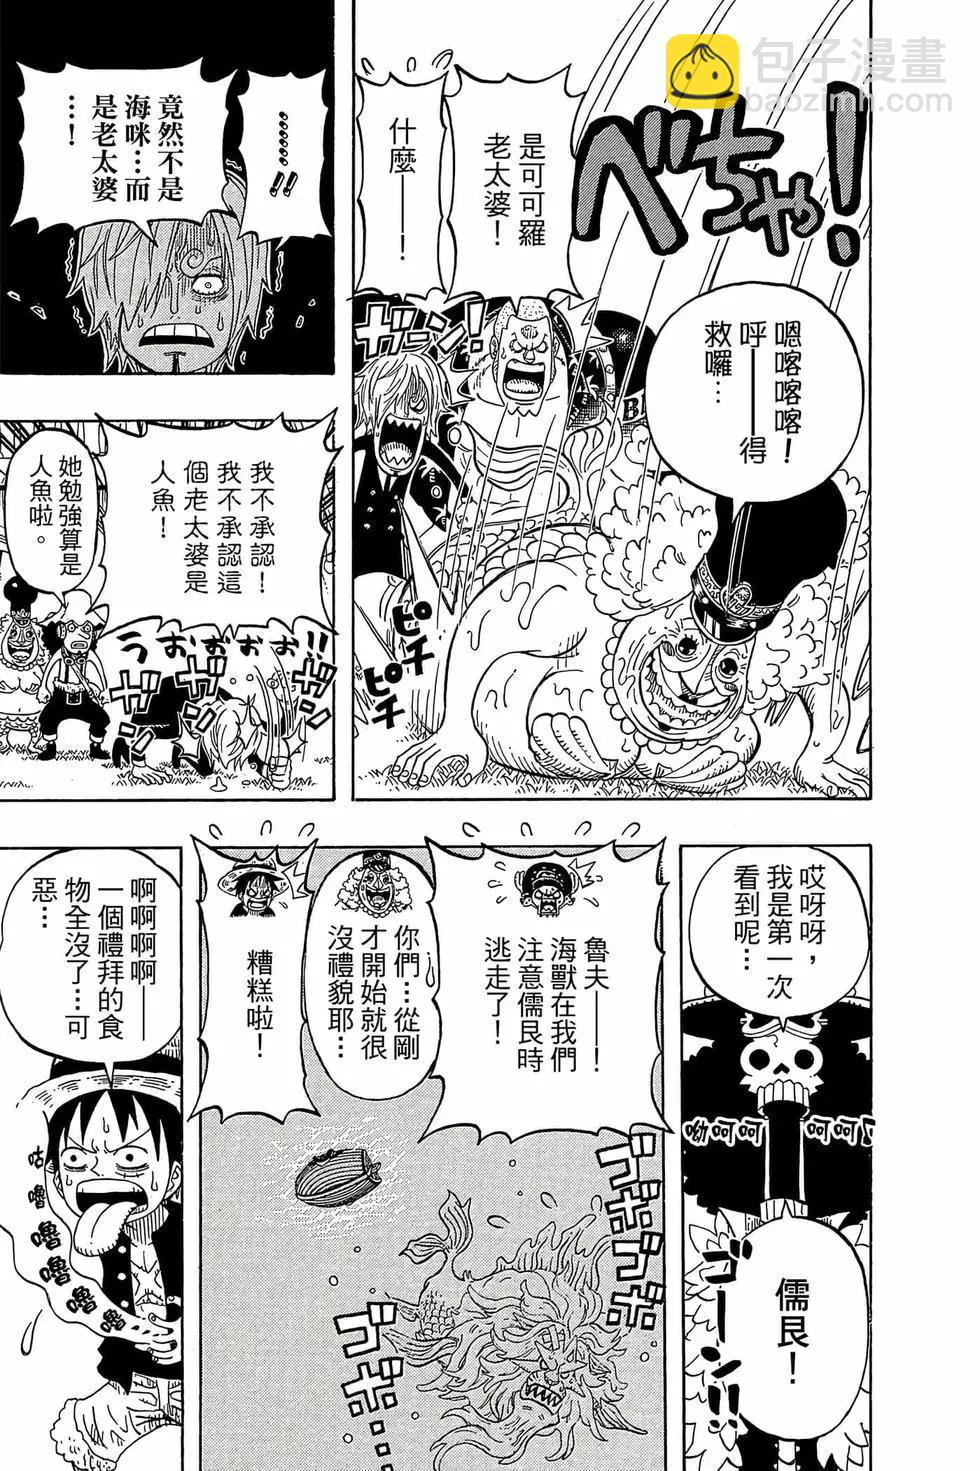 One piece party - 第01卷(1/4) - 8